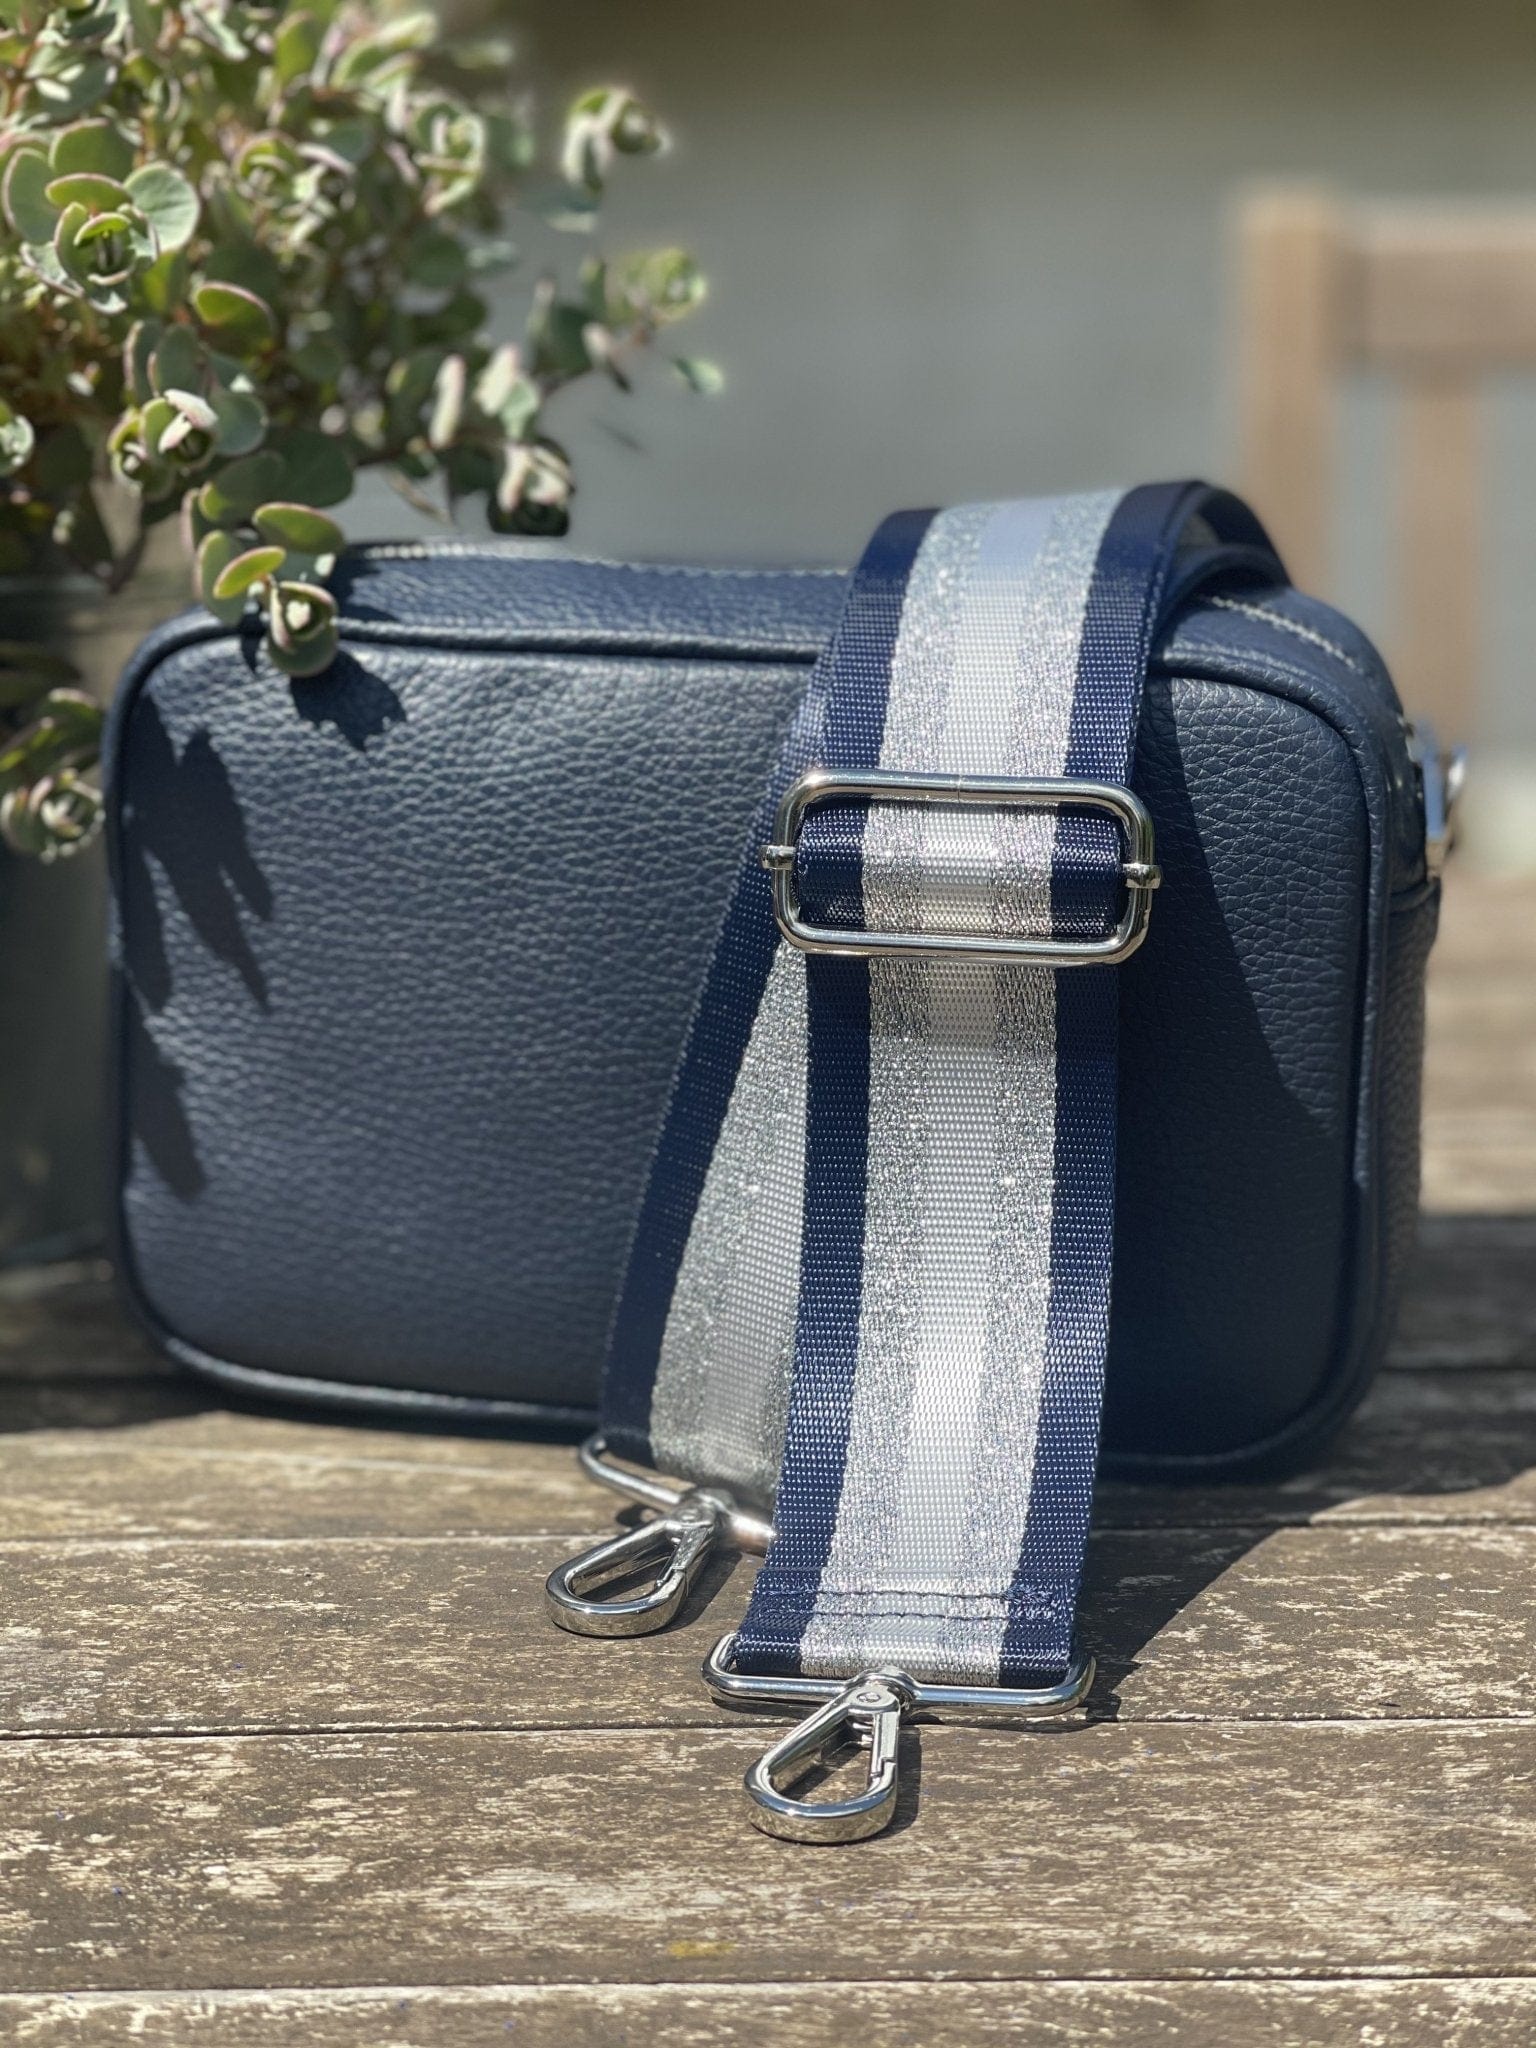 accessory Bag Strap - Silver, Navy And Silver Grey Stripe